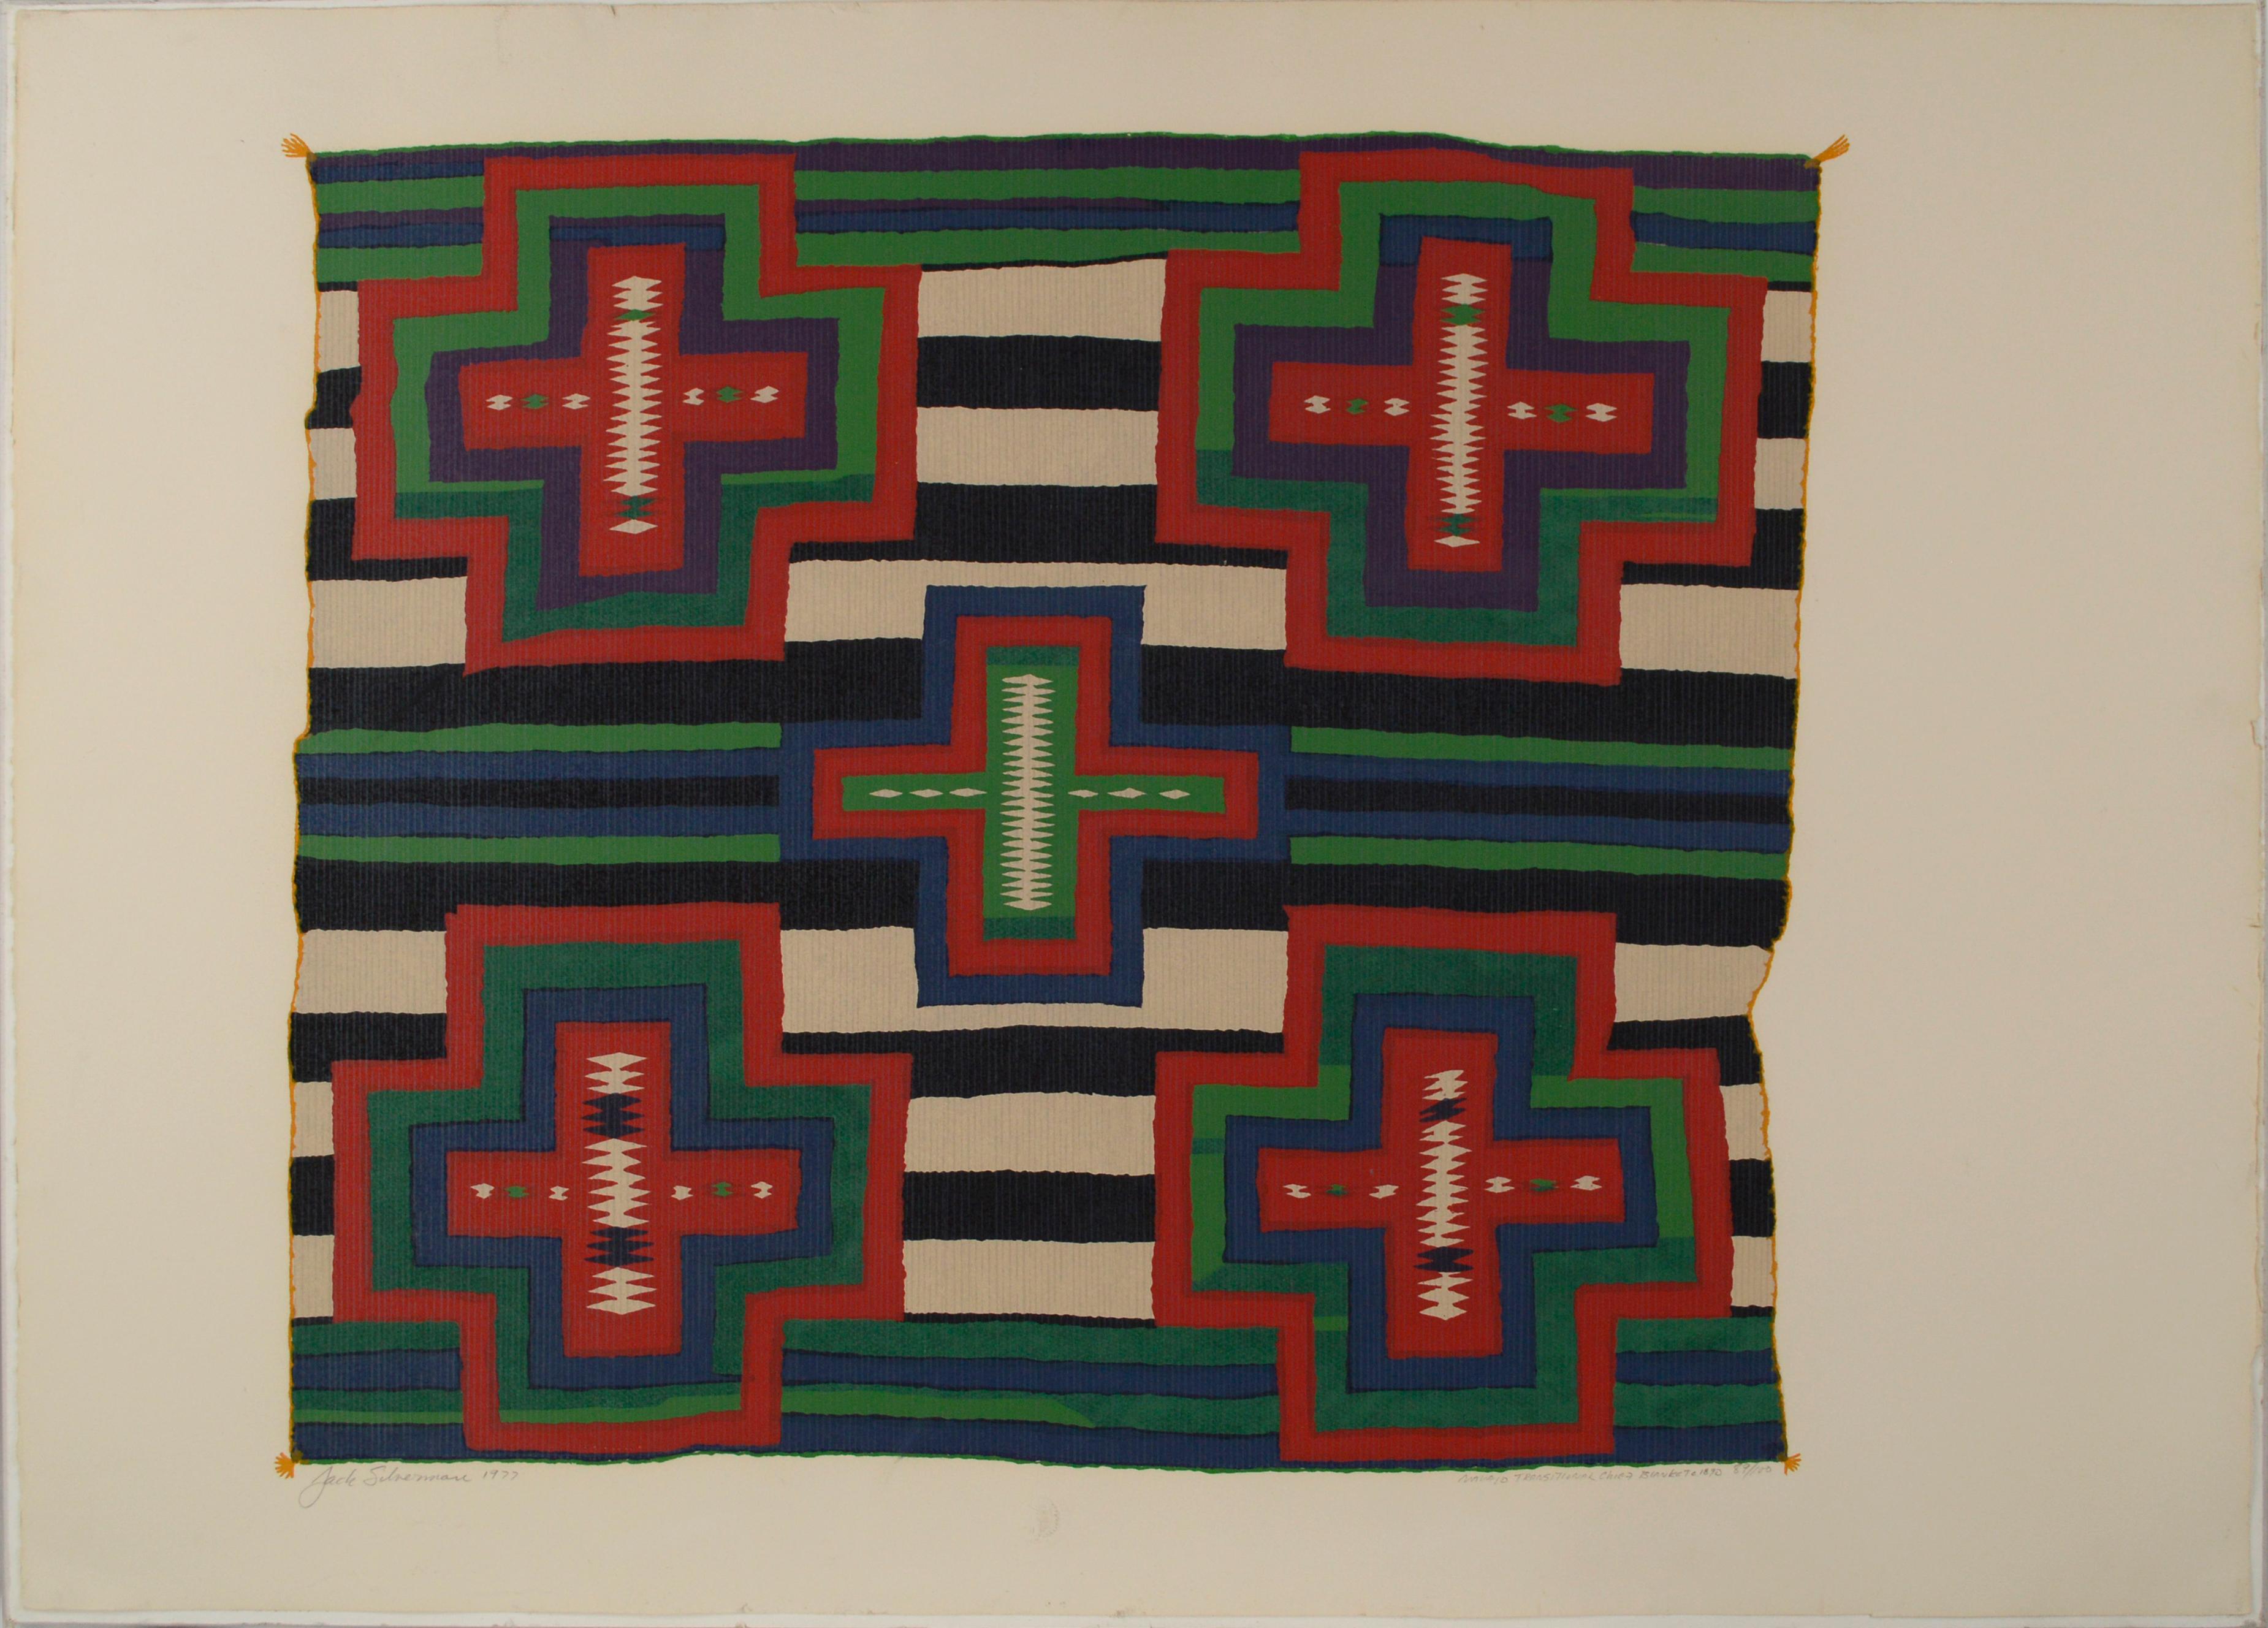  "NAVAJO LATE CLASSIC CHIEF BLANKET C.1900" JACK SILVERMAN SIGNED SERIGRAPH 1977